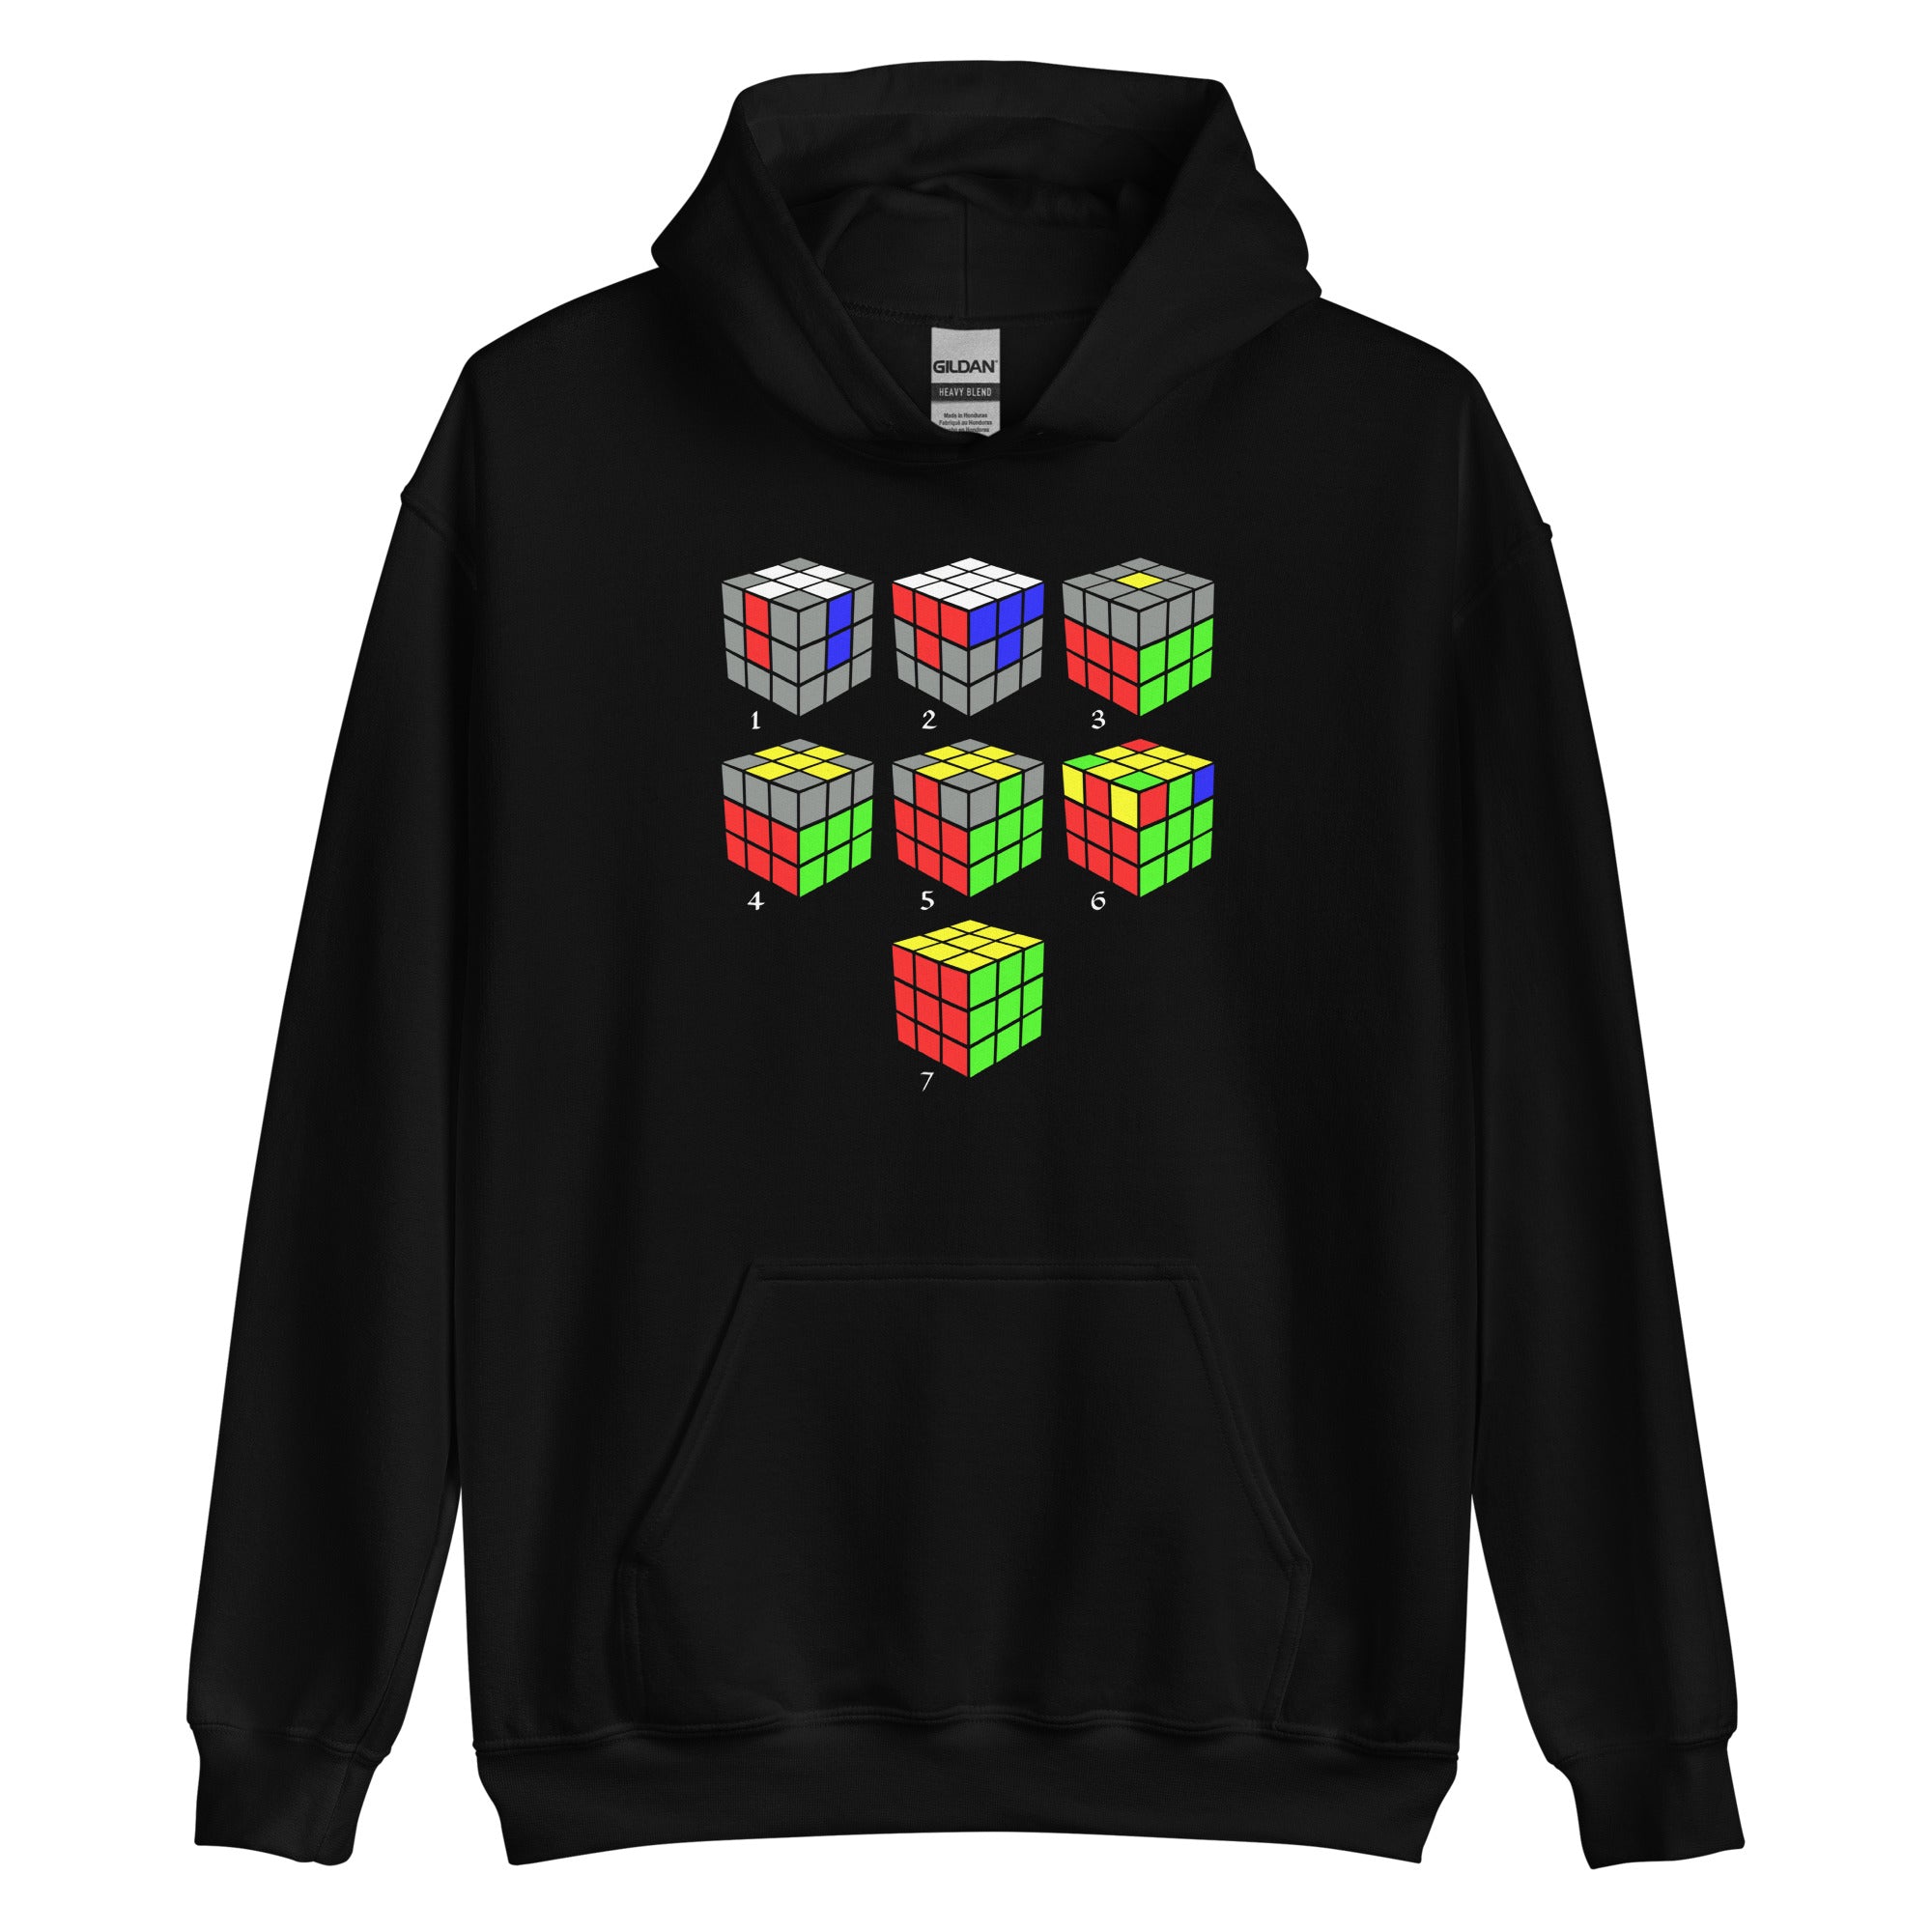 How To Solve A Puzzle Speed Cube Diagram Unisex Hoodie Sweatshirt